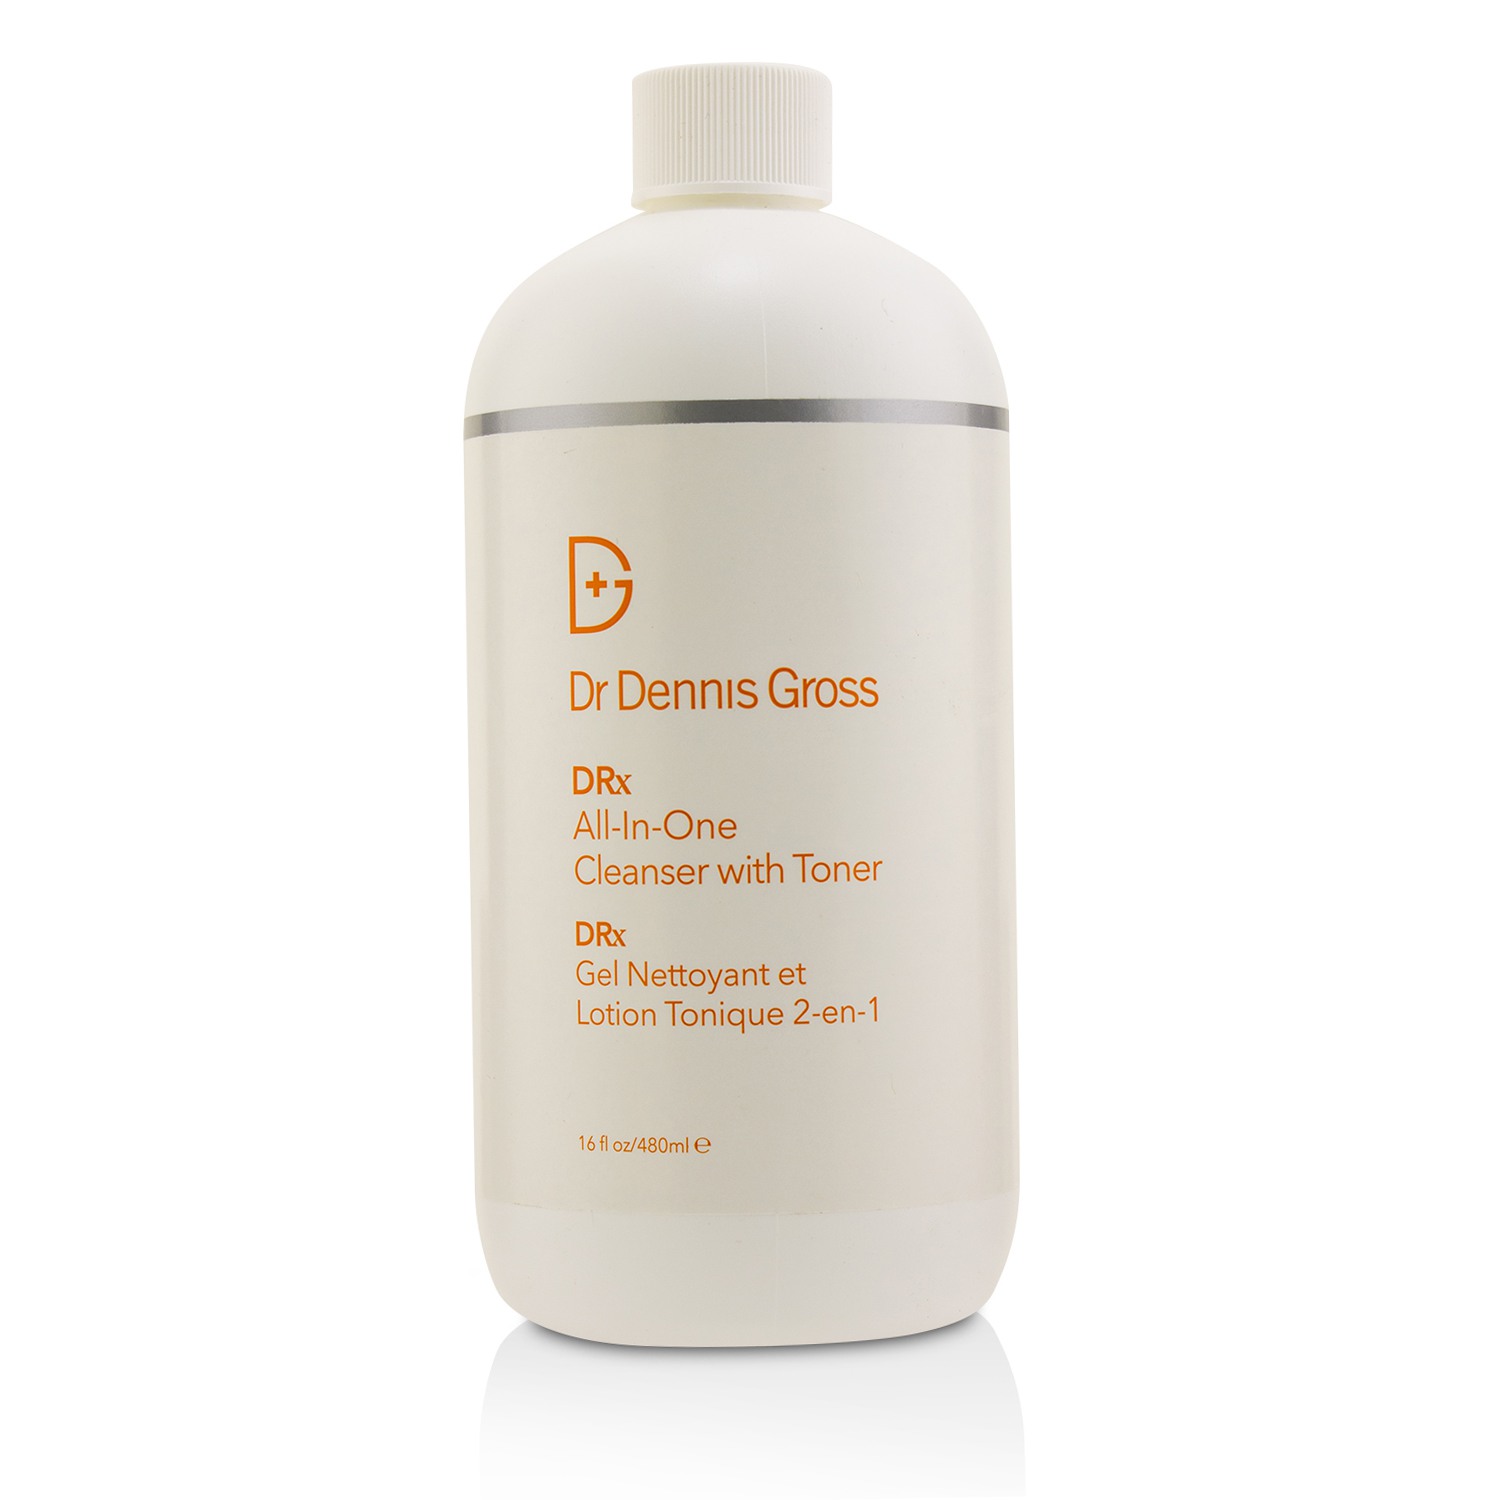 DRx All-In-One Cleanser With Toner Dr Dennis Gross Image